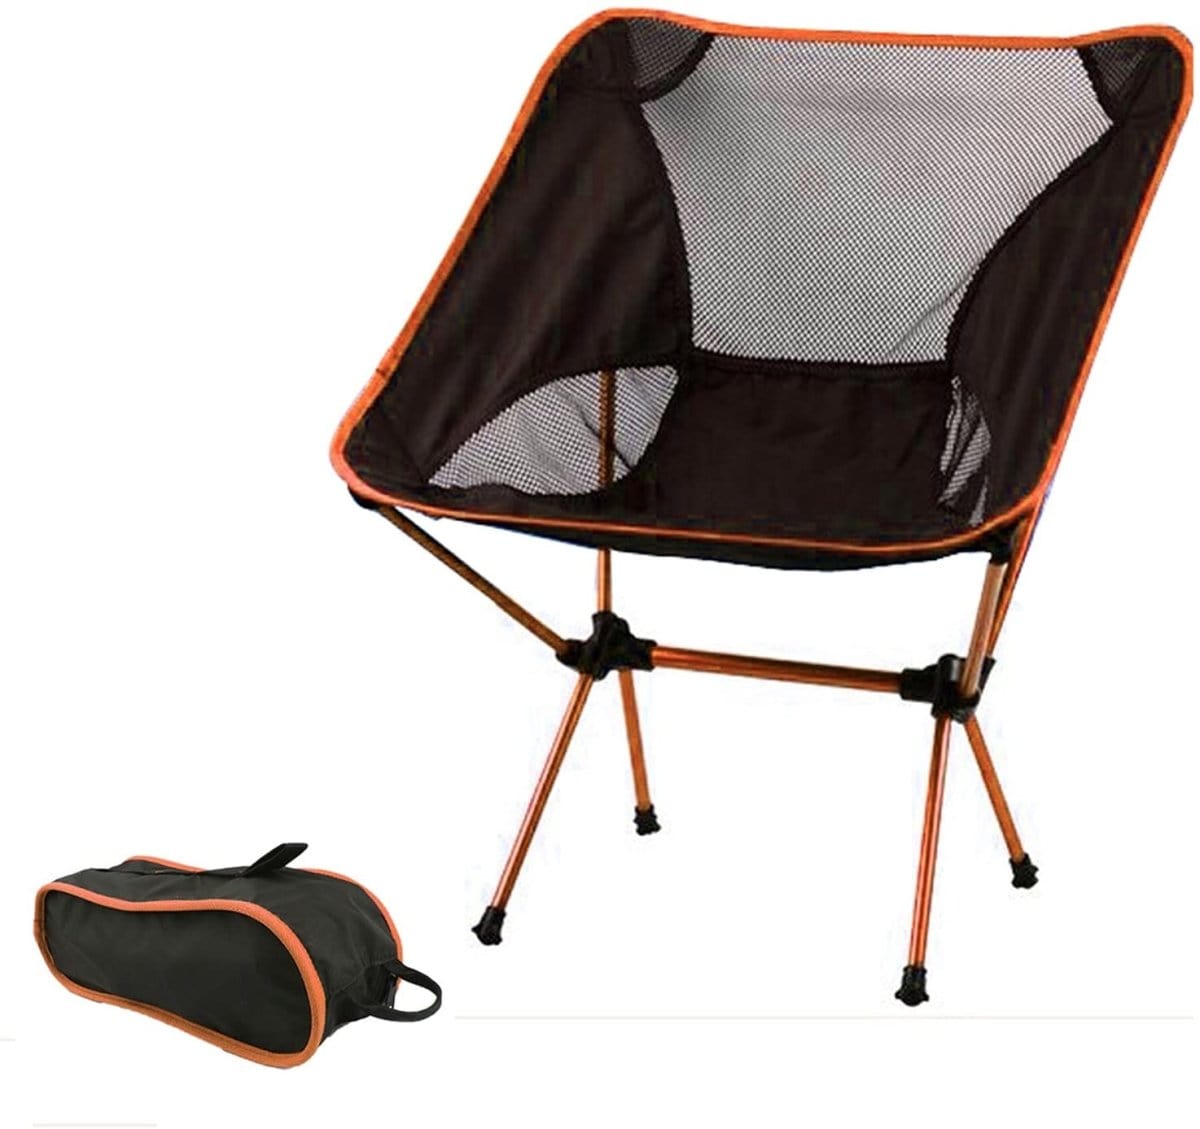 Ultralight Aluminum Alloy Folding Camping Camp Chair Outdoor Hiking Patio Backpacking Full Blue